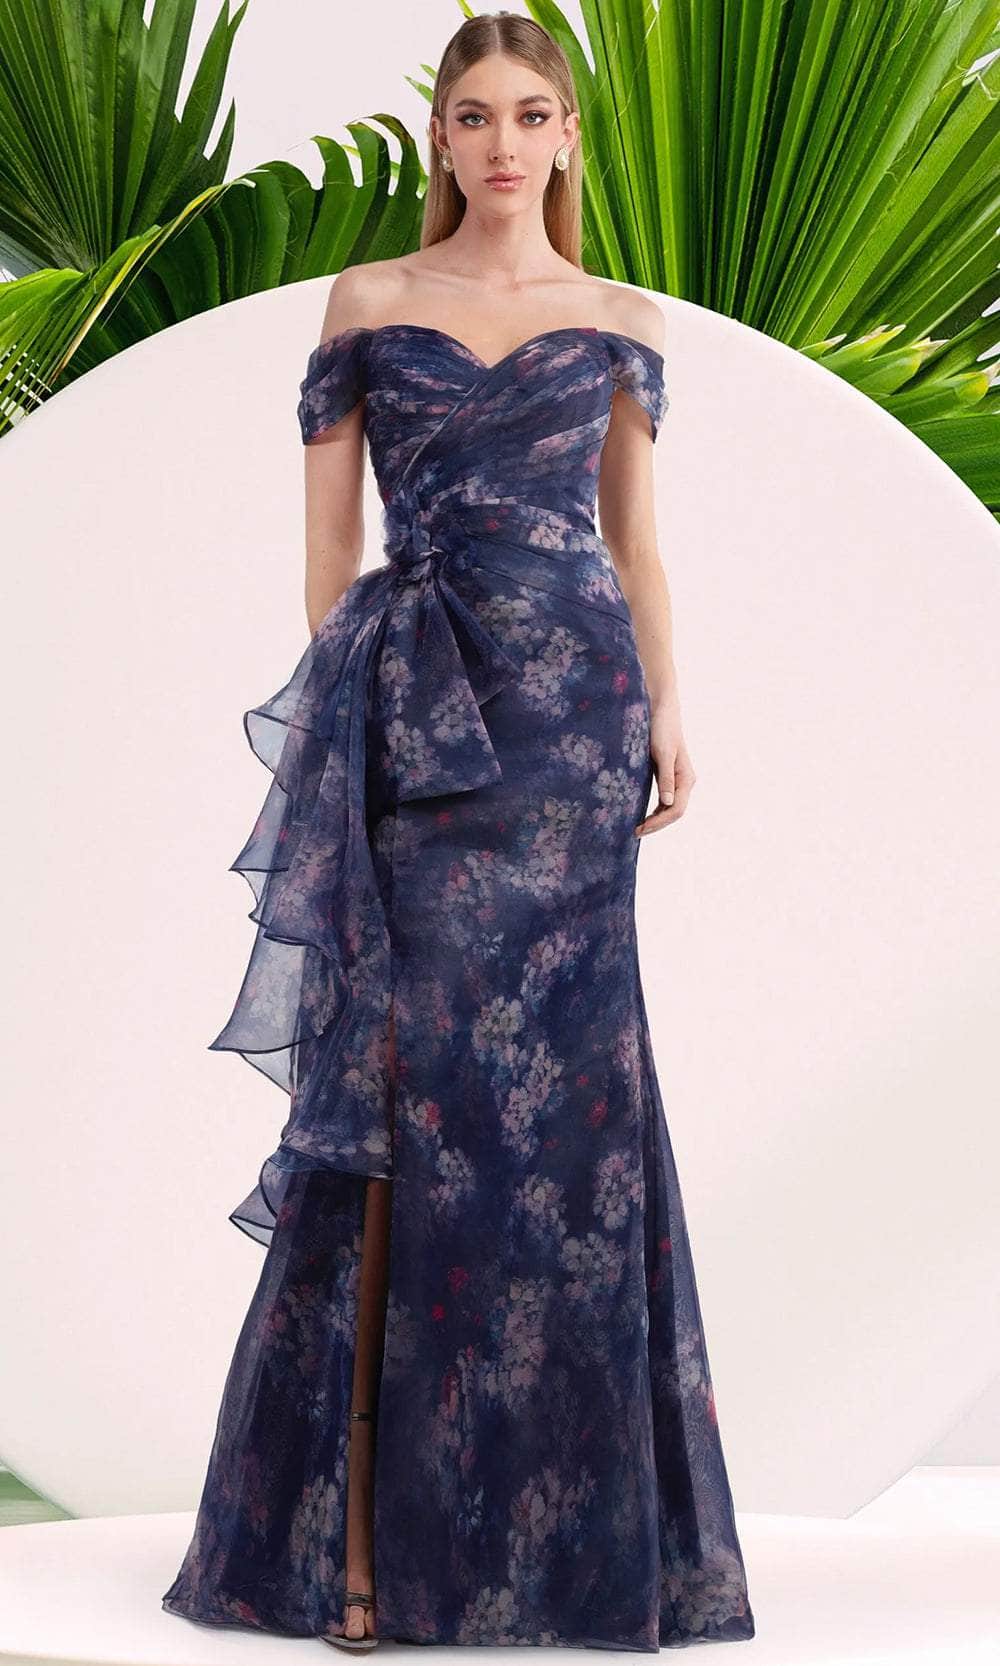 Image of Janique W3017 - Ruffle Drape Floral Print Gown